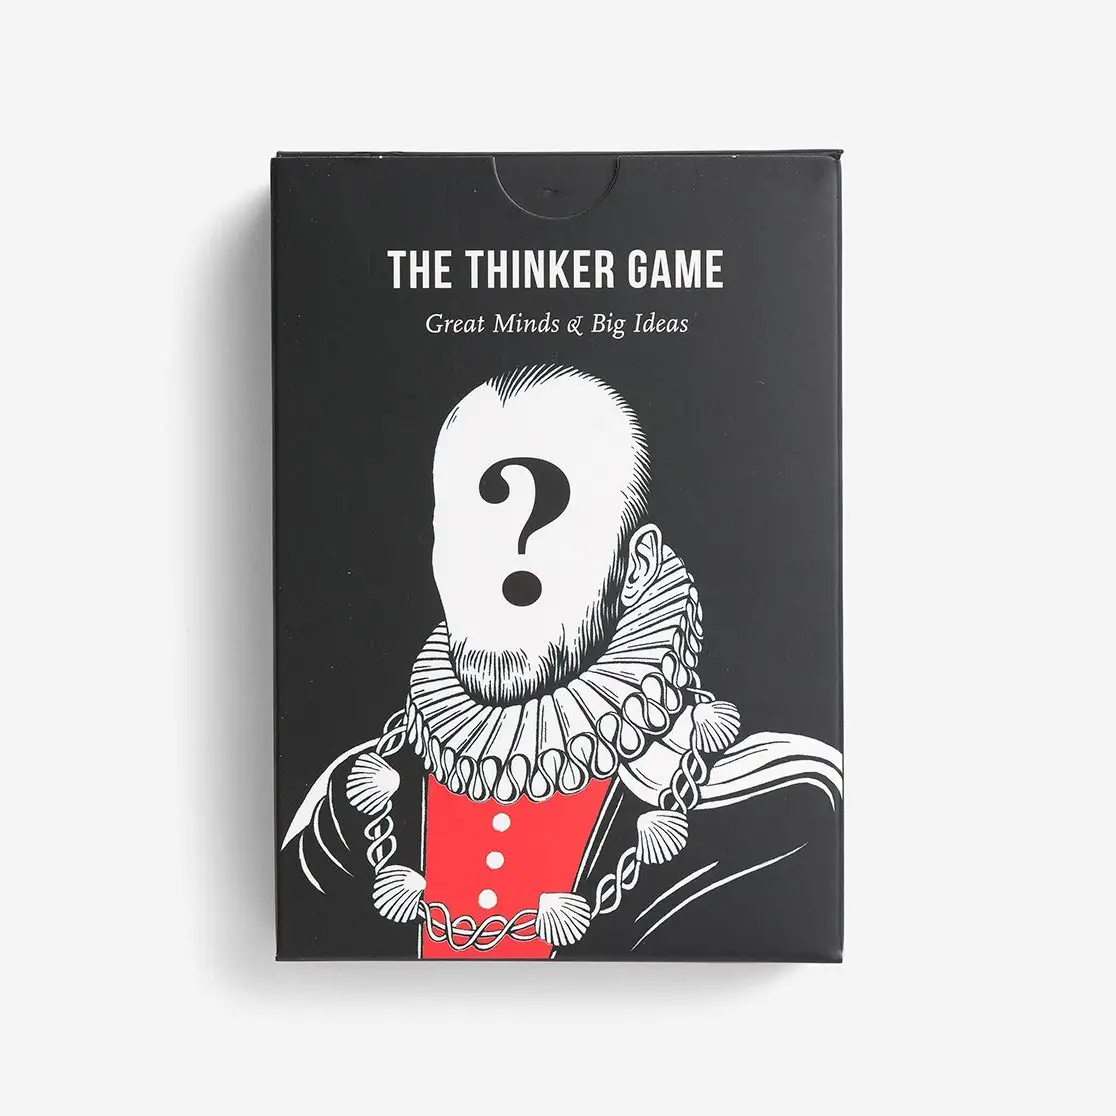 The Thinker Game (Great Minds & Big Ideas)